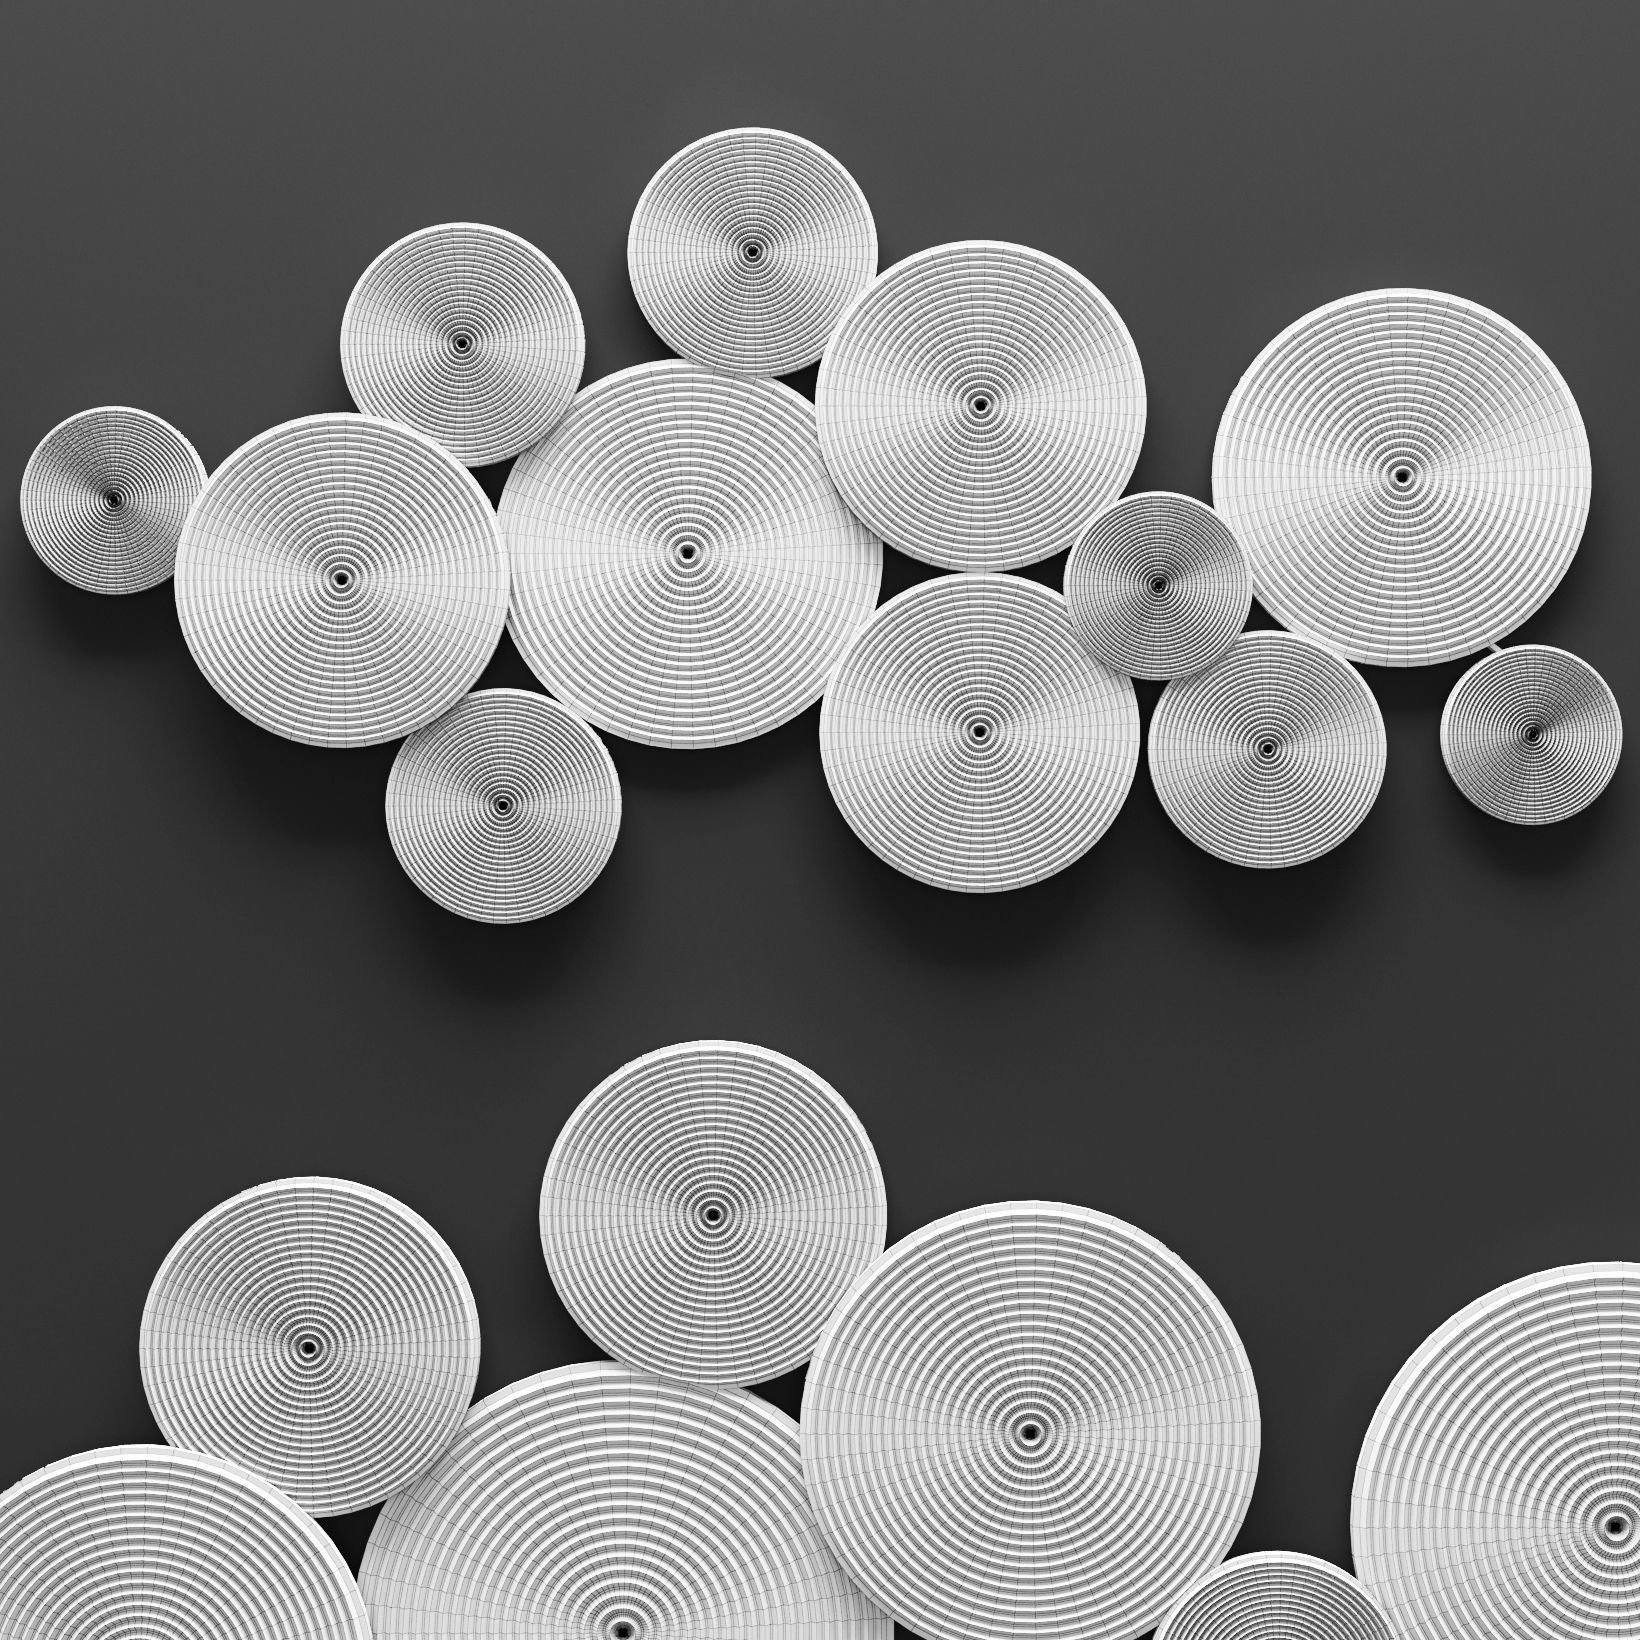 Most Recent Colors : Silver Circles Wall Decor Awesome Metal Circles Wall Art For Circles 3d Wall Art (View 13 of 15)